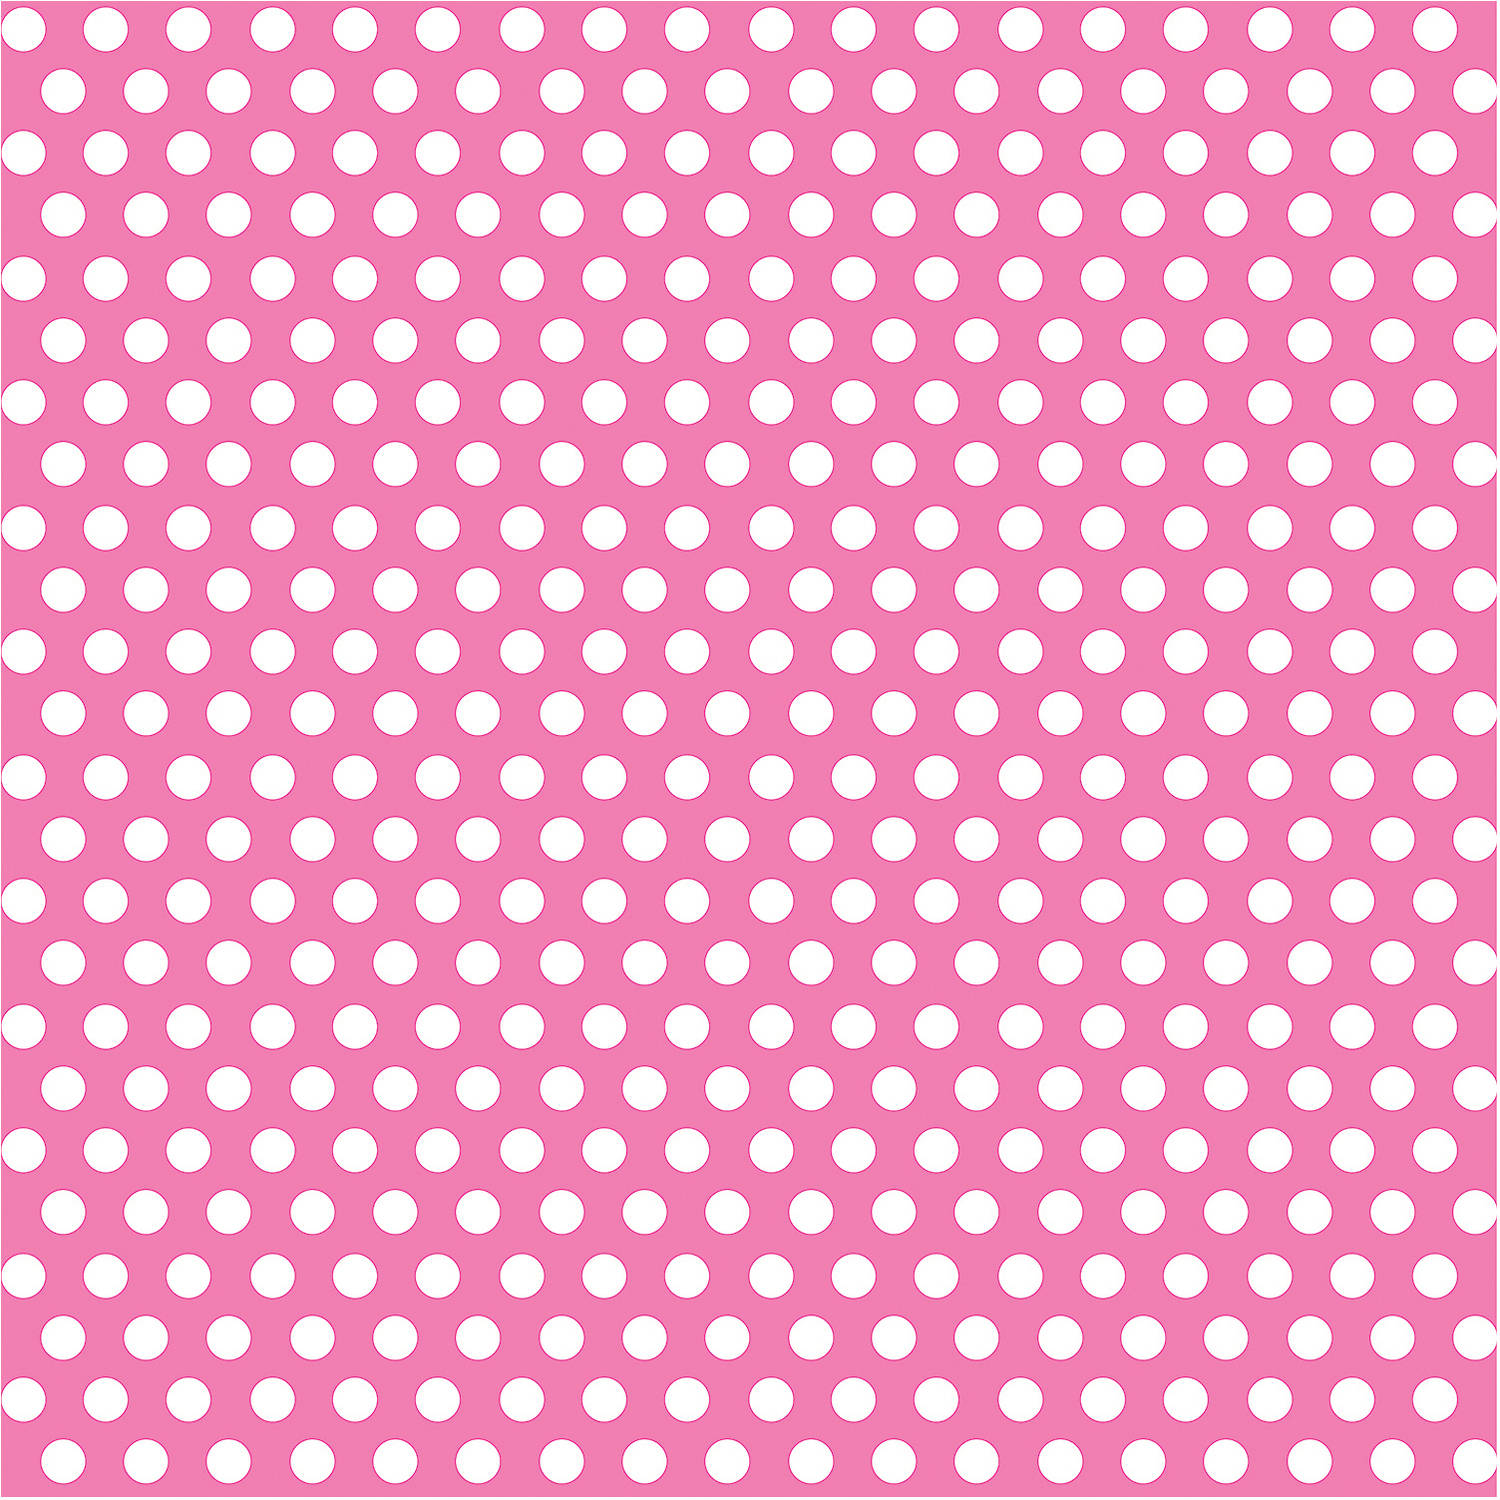 Unique Industries Hot Pink Paper Birthday Gift Wrap Paper, 353.96 sq ft. 